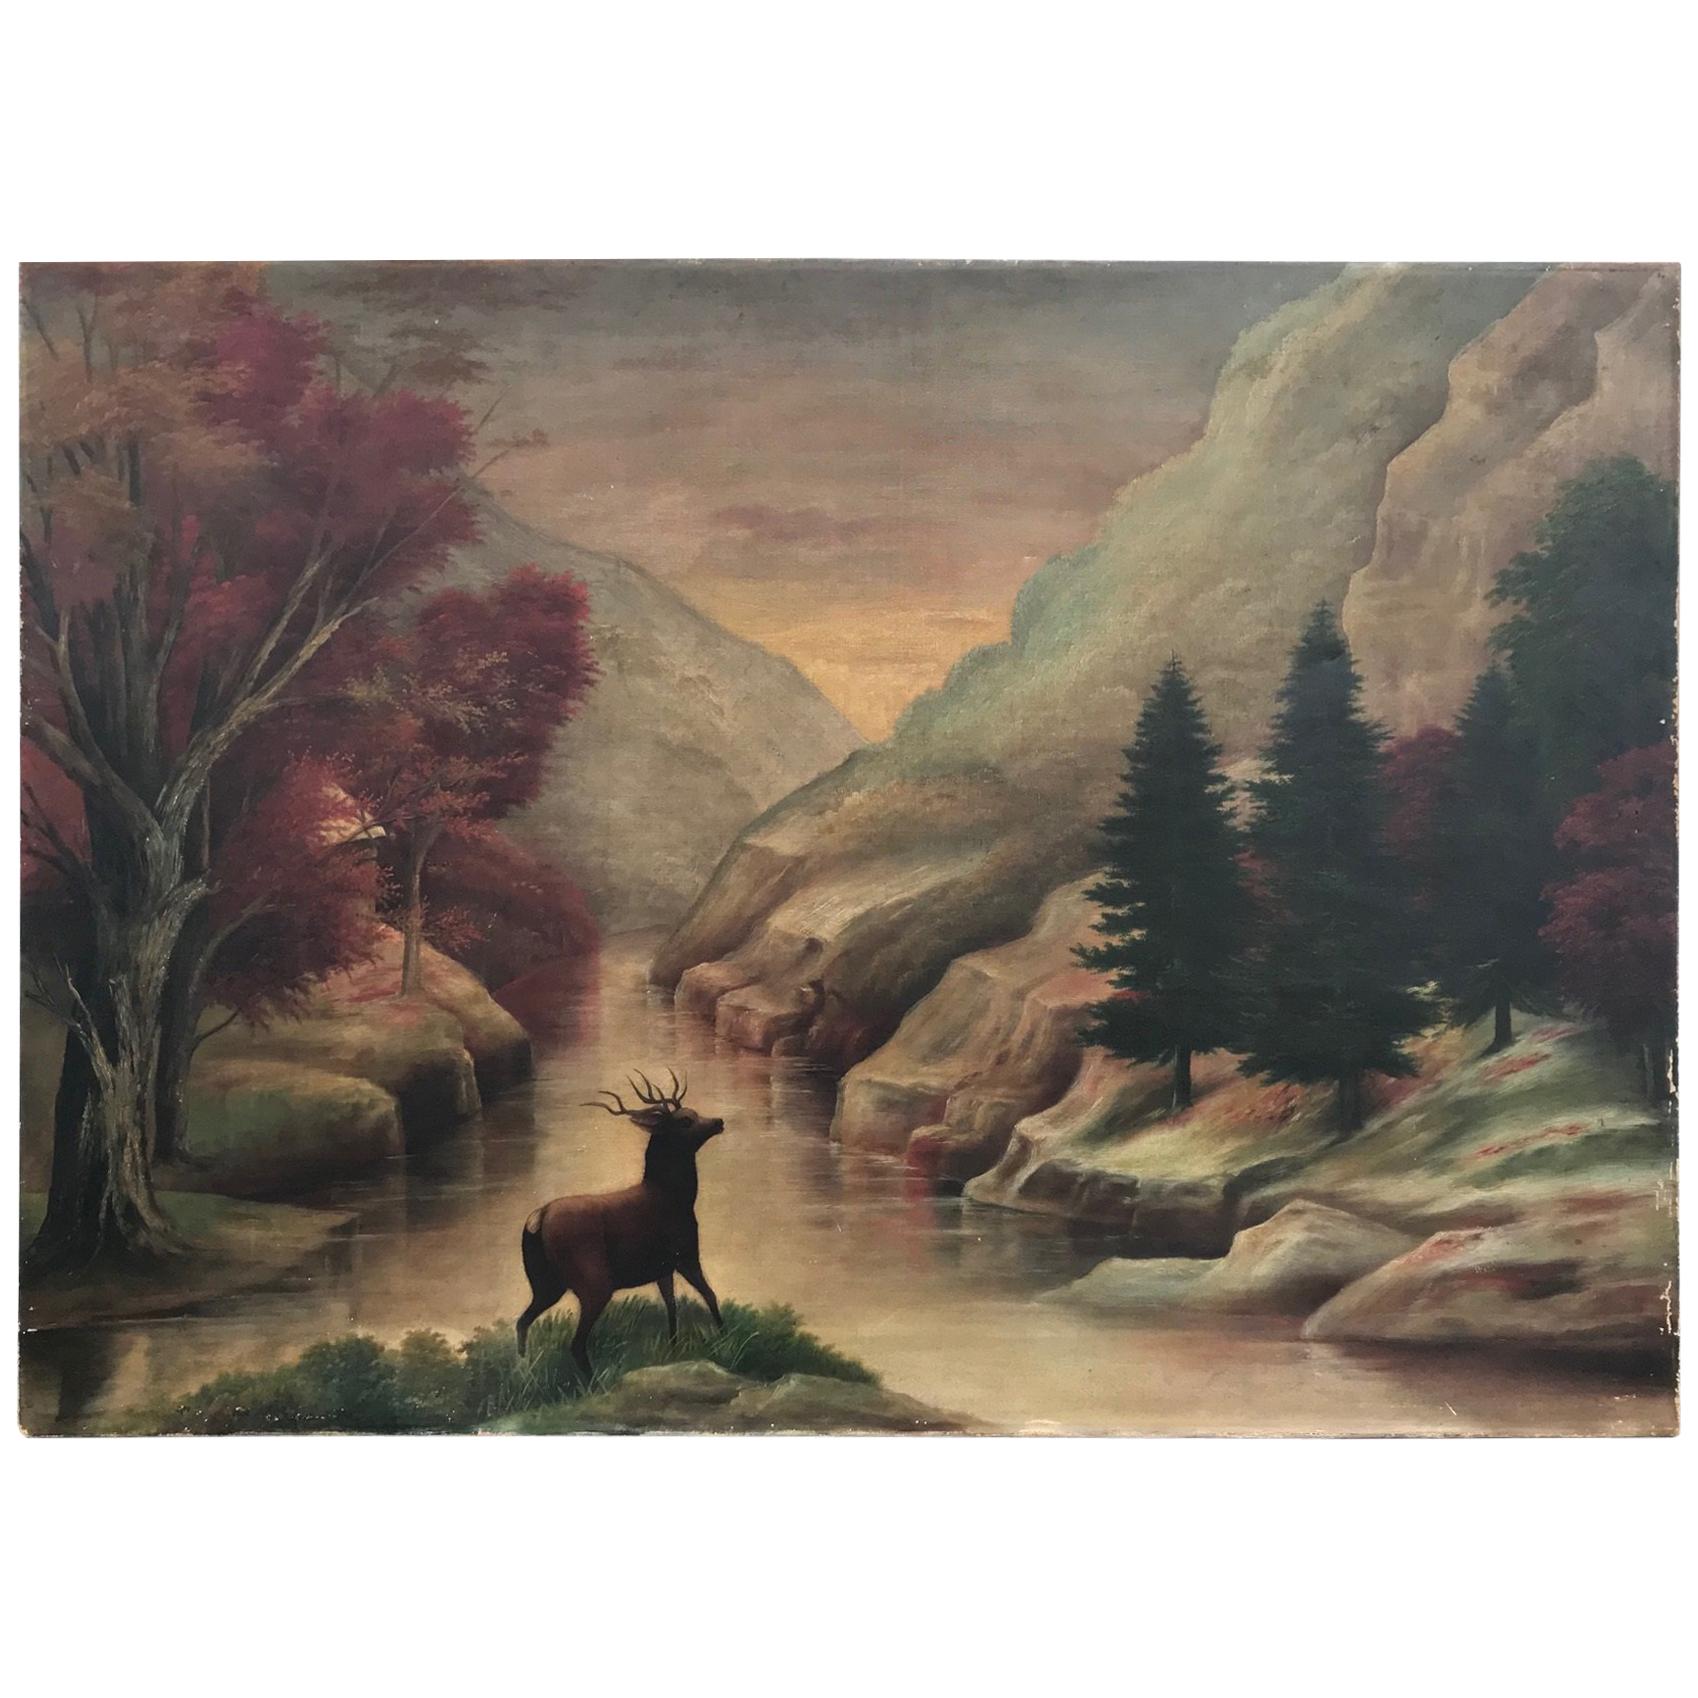 19th Century American School Landscape Painting, Oil on Canvas